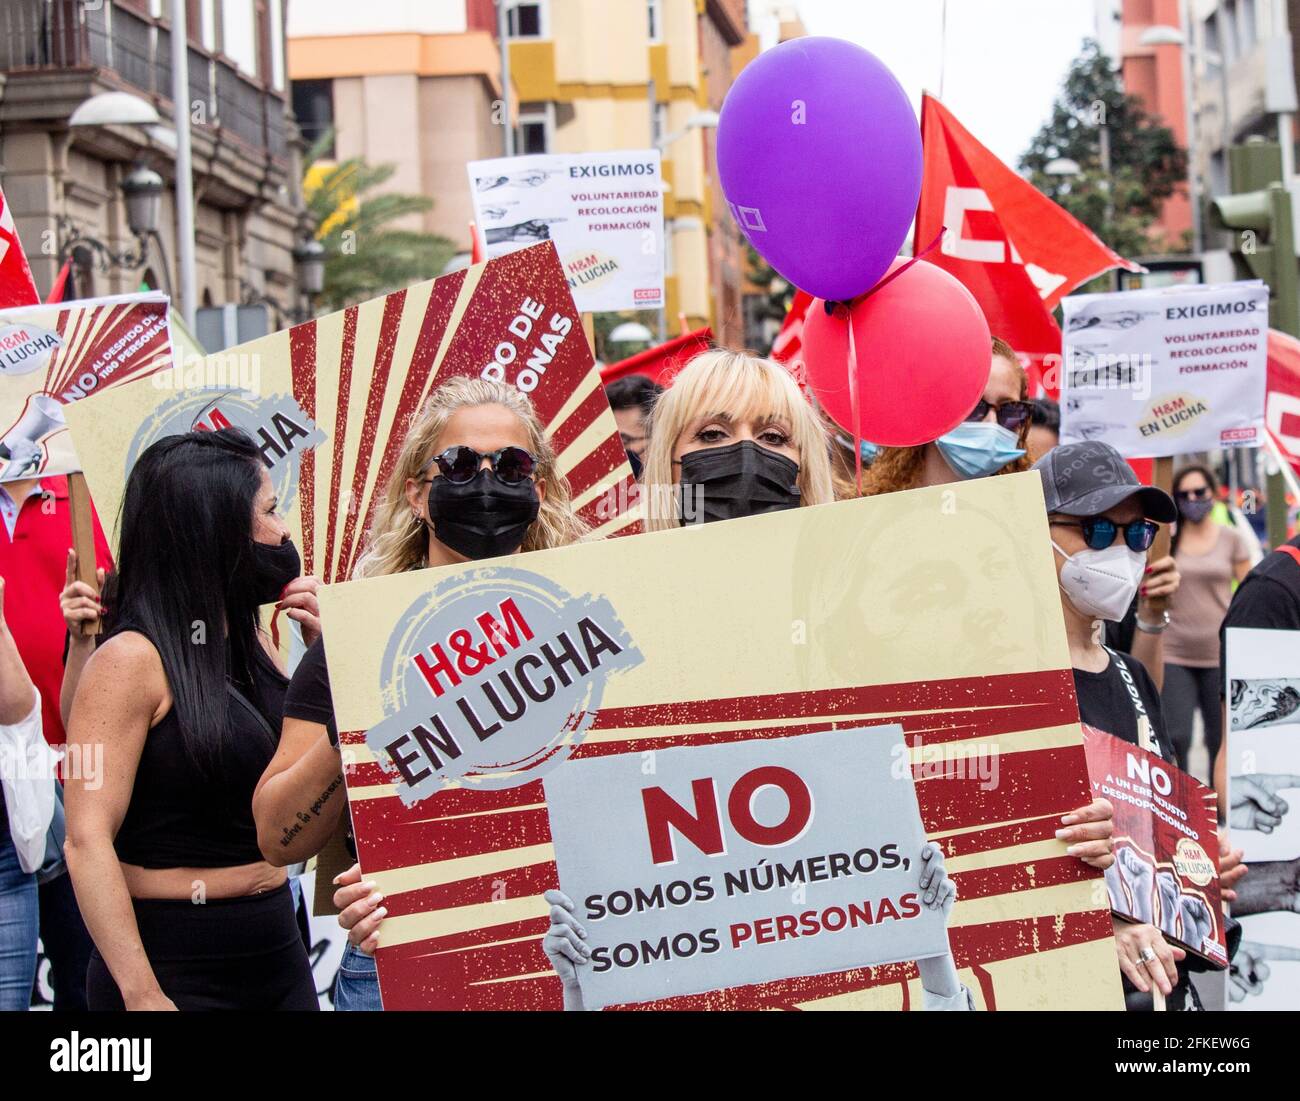 Las Palmas, Gran Canaria, Canary Islands, Spain. 1st May, 2021. Labour  day/International workers' day demonstration in Las Palmas the capital of  Gran Canaria. PICTURED: H&M store employees protest against the proposed  closure